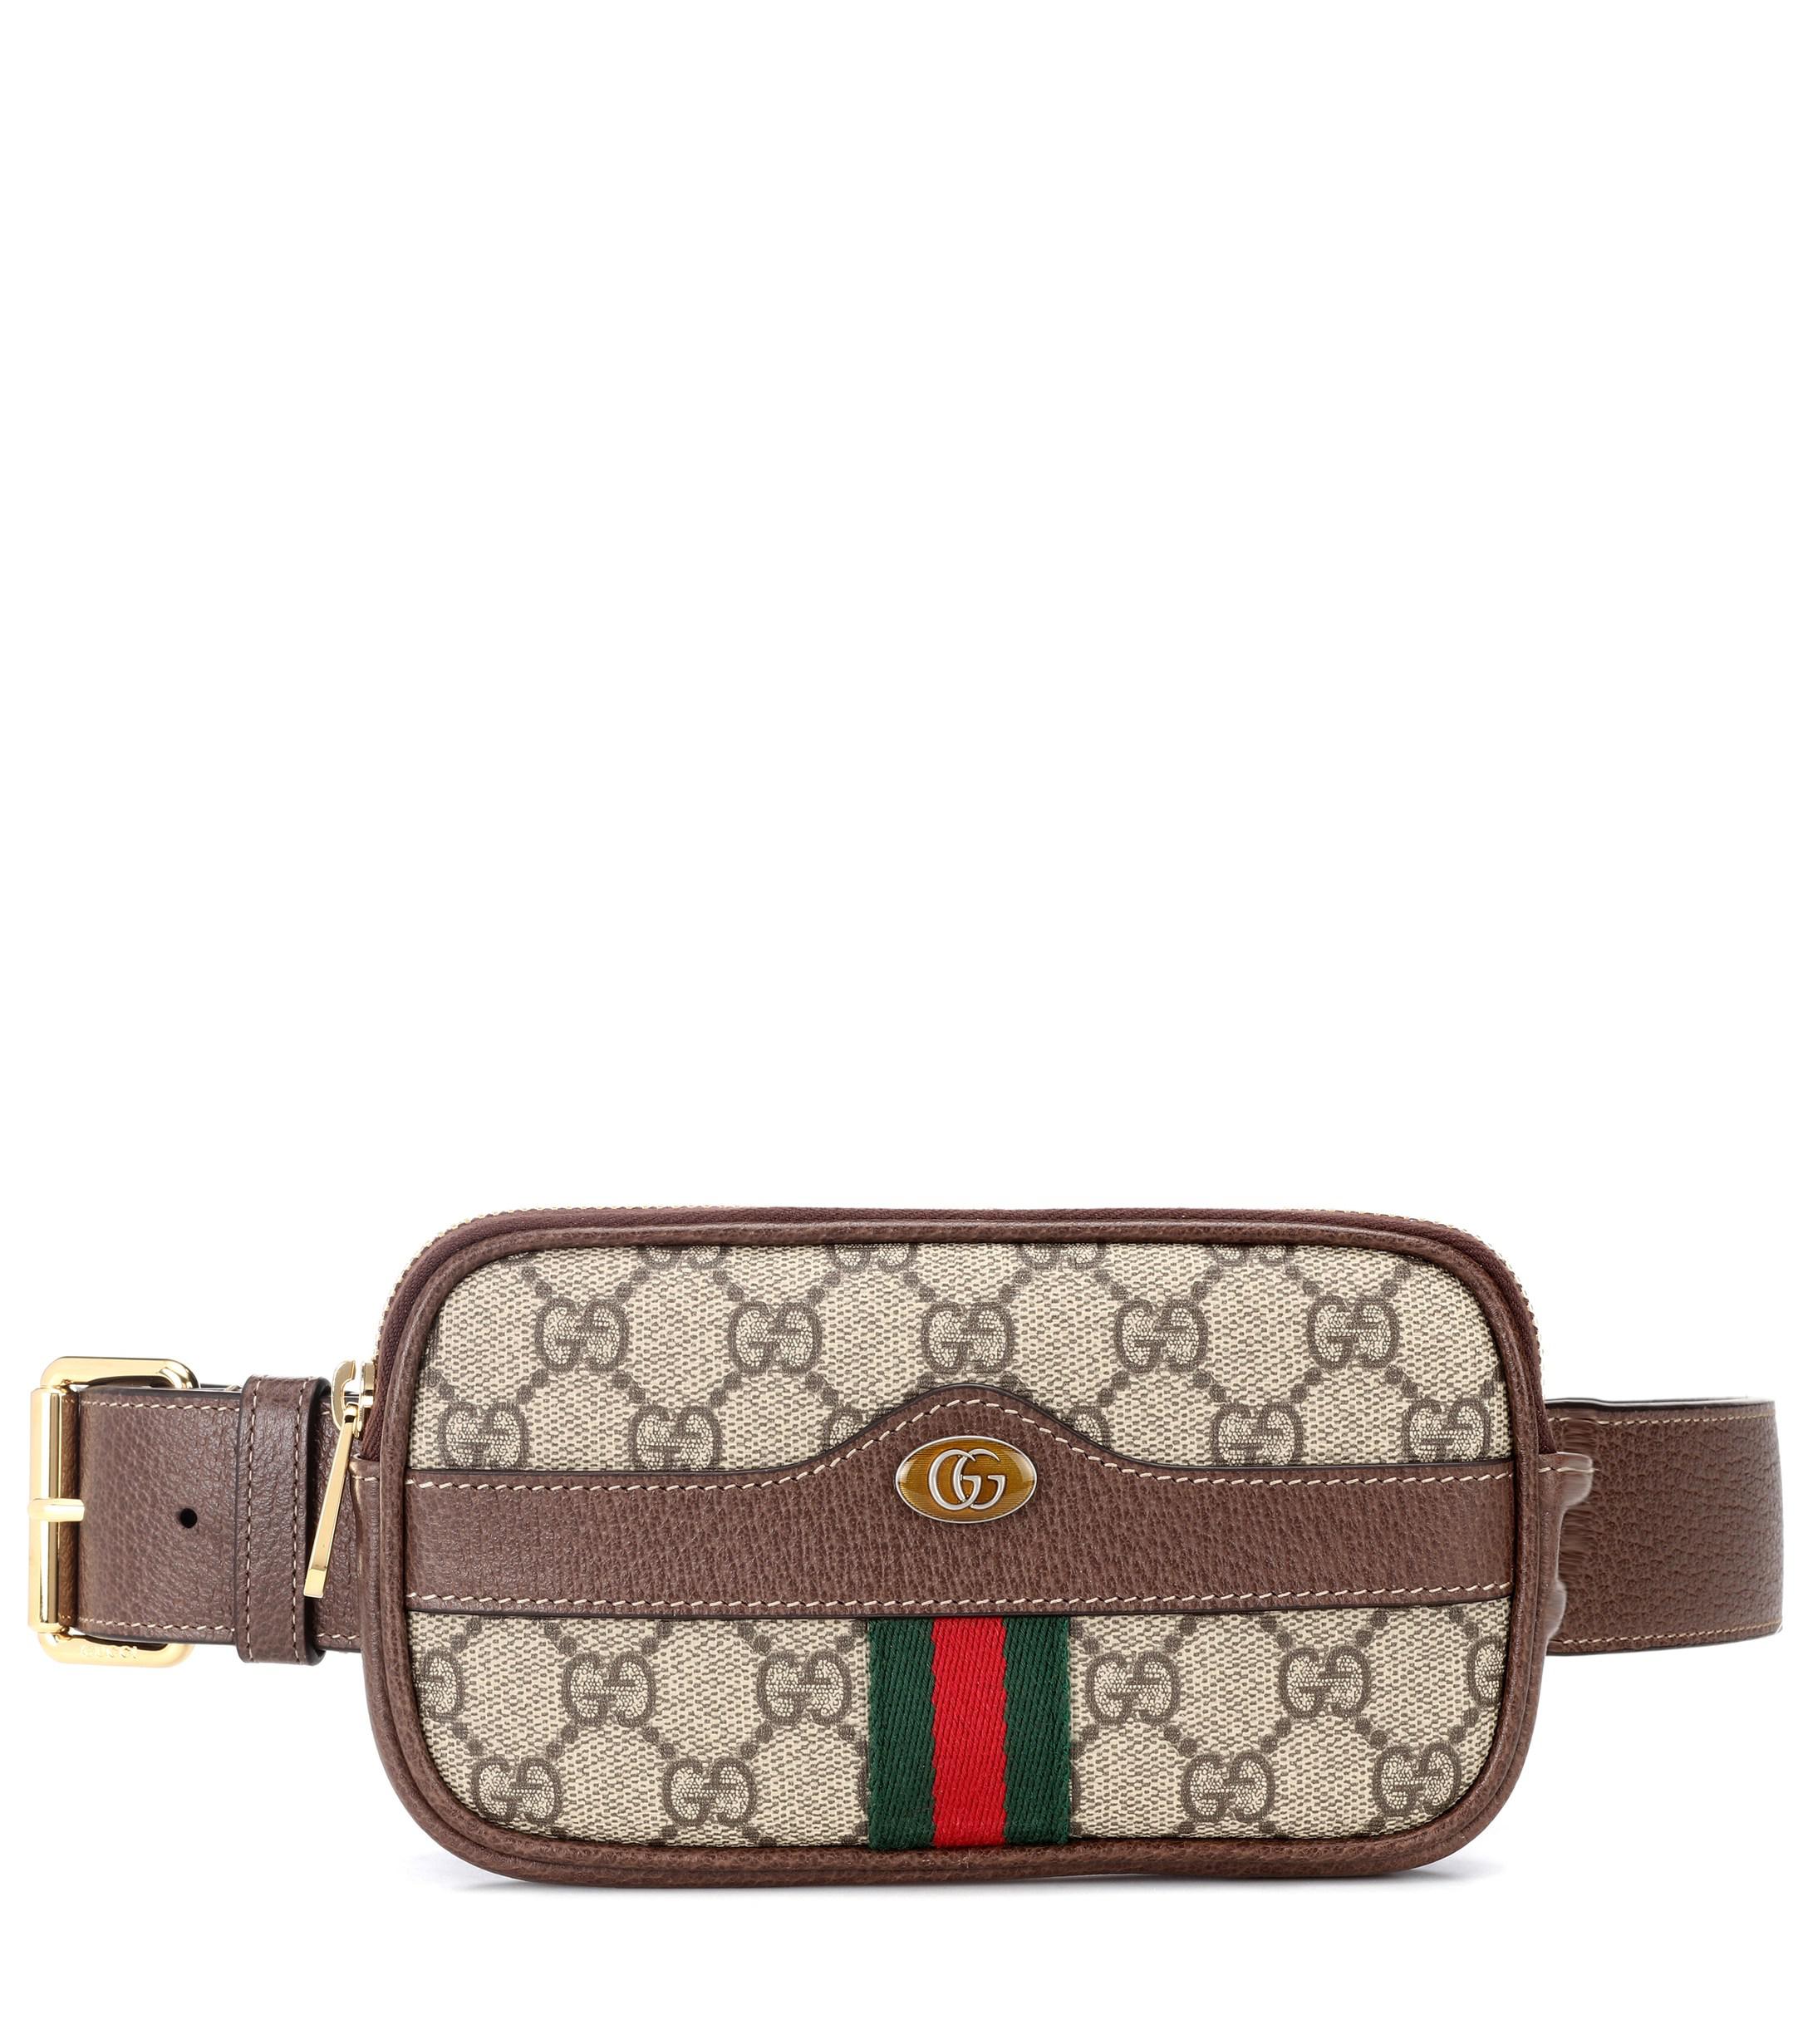 Gucci Leather Ophidia GG Supreme Belt Bag in Brown - Lyst